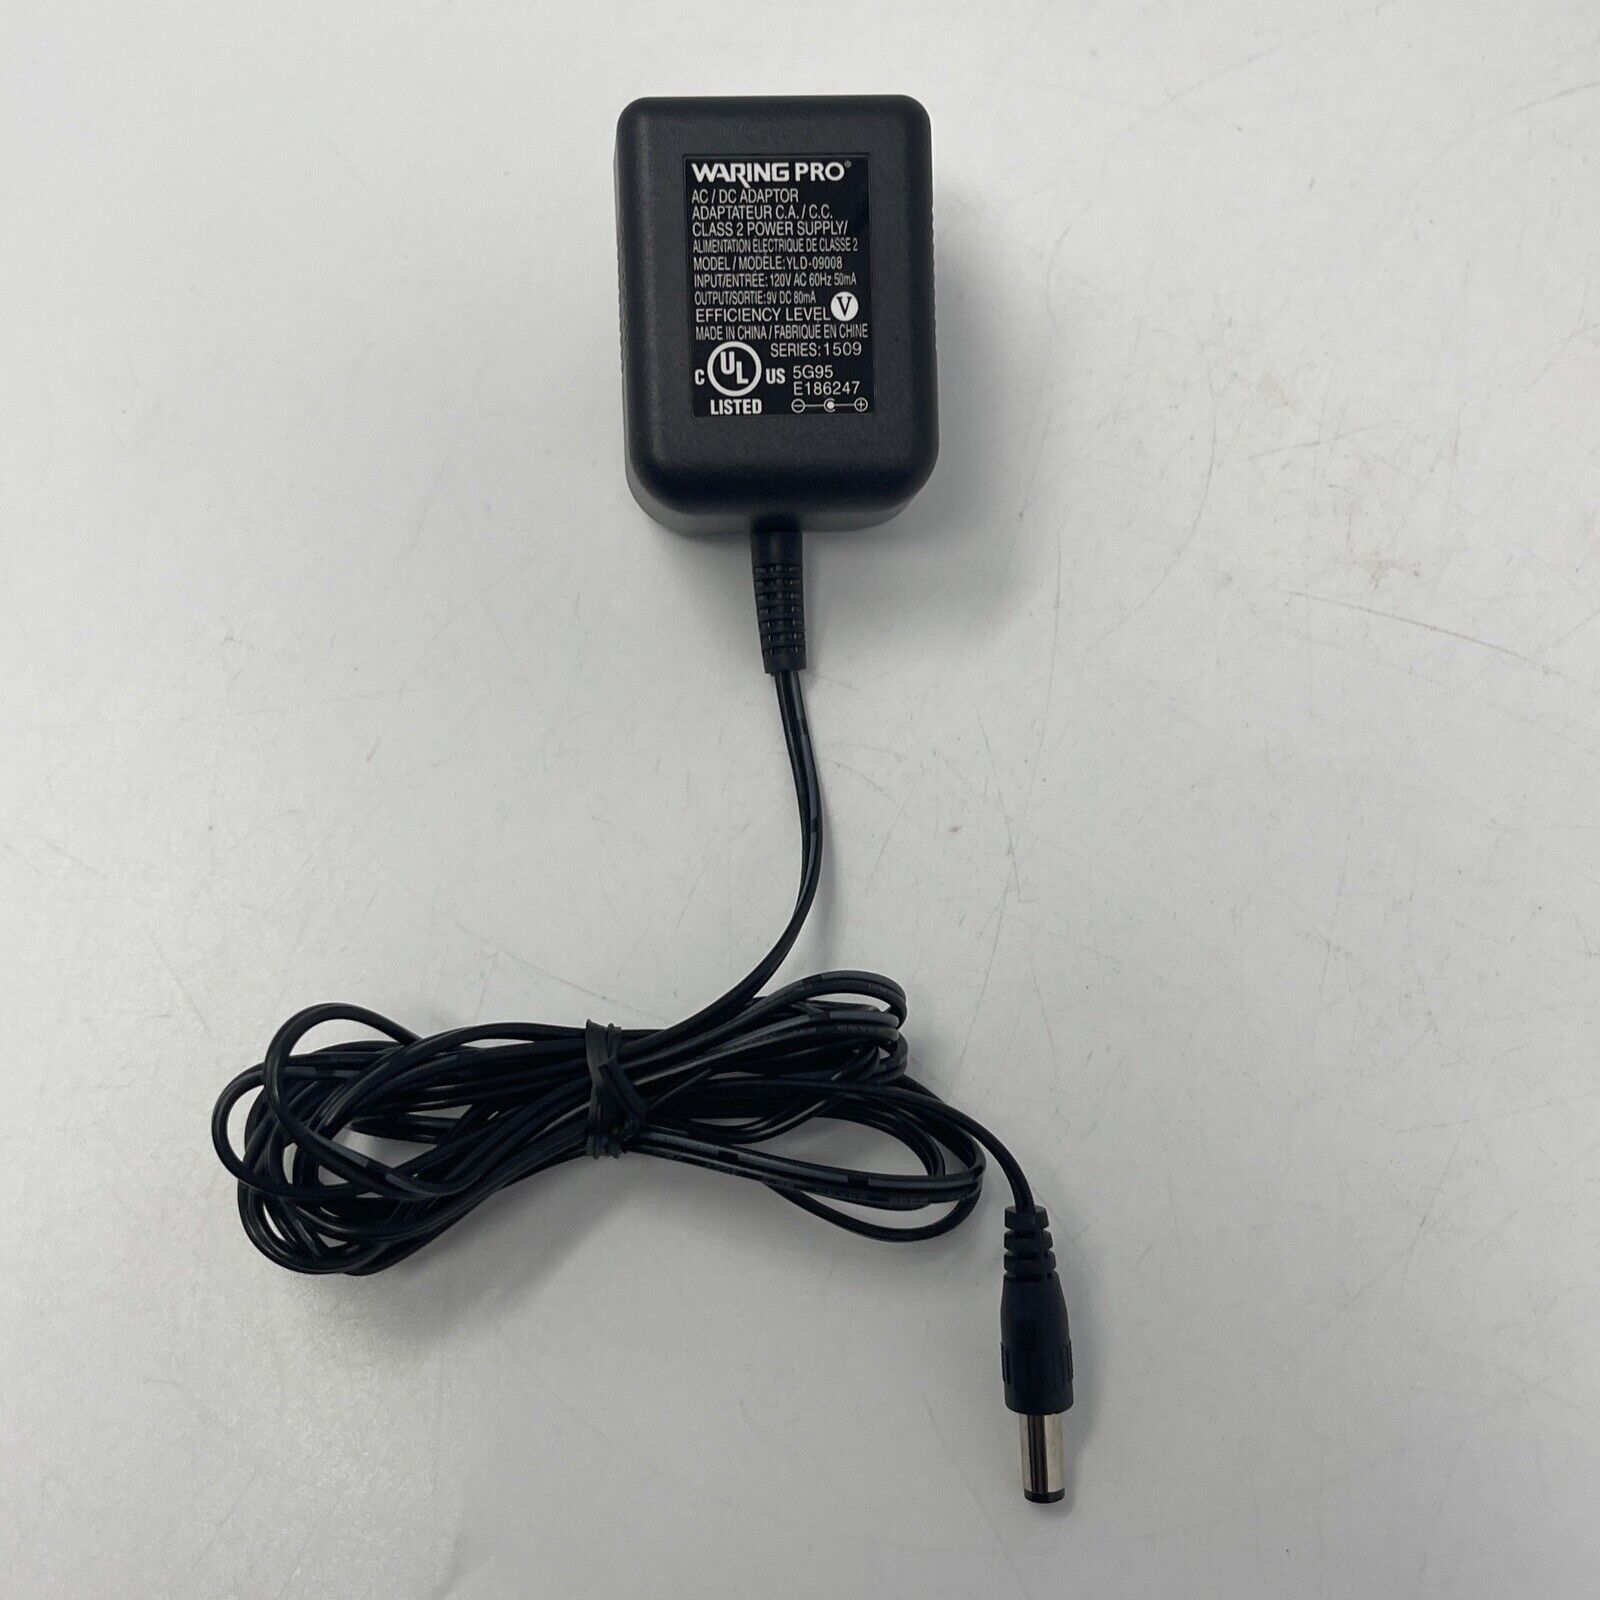 *Brand NEW*Waring Pro AC DC Adapter Power Supply YLD-09008 Series 1509 9V 80mA